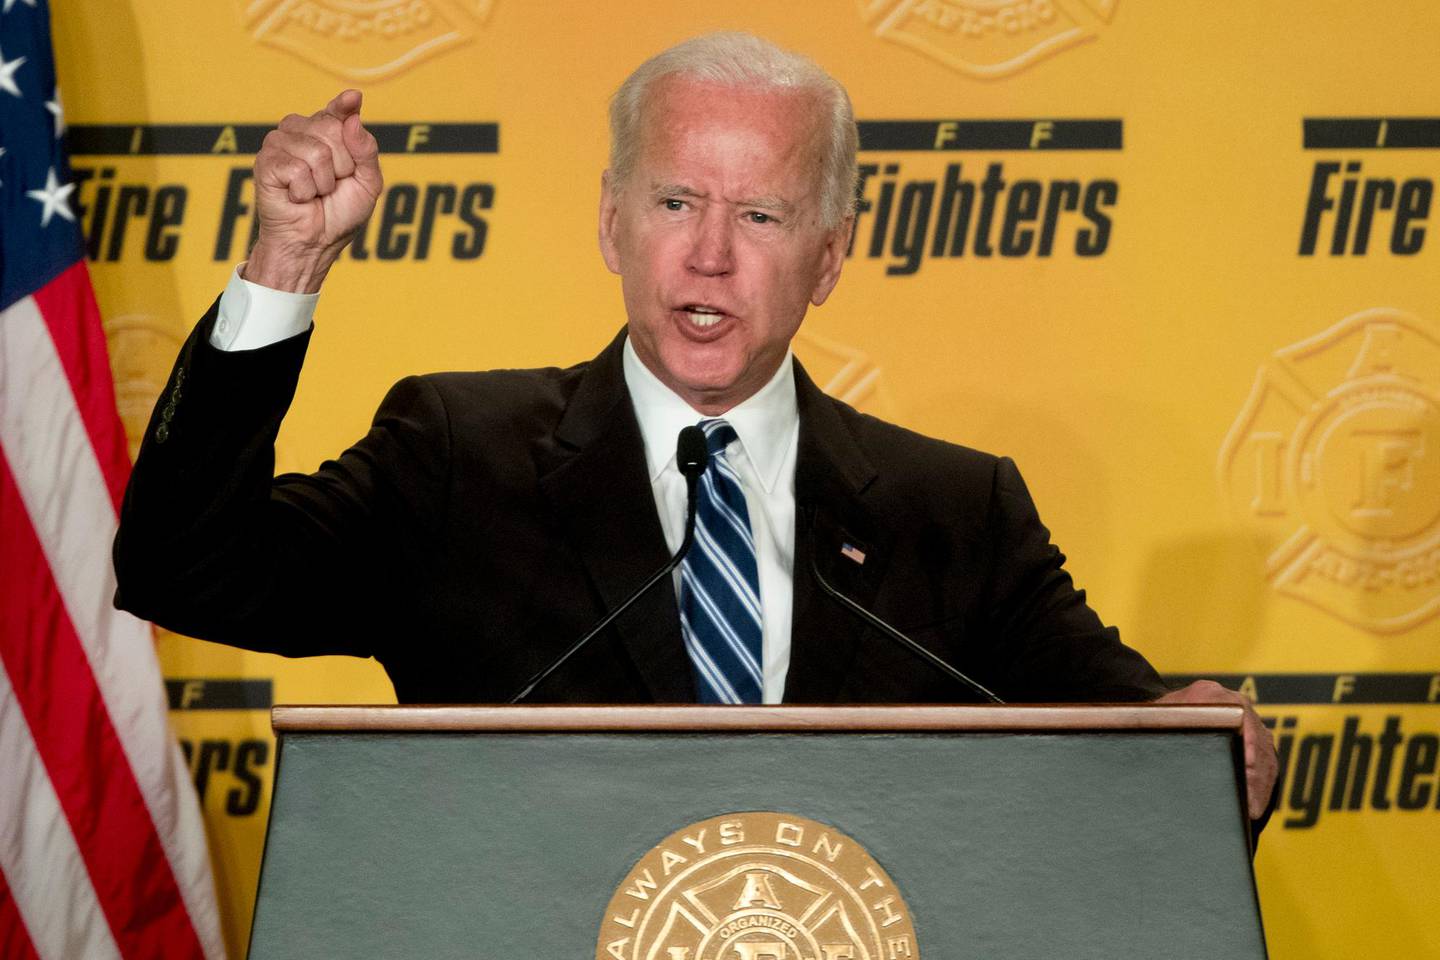 FILE - In this March 12, 2019 photo, former Vice President Joe Biden speaks to the International Association of Firefighters at the Hyatt Regency on Capitol Hill in Washington. As the former vice president inches closer toward a third White House run, several moments in his long career loom as immediate political liabilities should he decide to join a Democratic primary already stocked with more than a dozen candidates. From his vote for the Iraq war to his key role in passing a bill that made bankruptcy harder to declare for debt-ridden Americans, Biden would have multiple fronts on which to reconcile his past with the future of a party thatÄôs moved leftward even since he left former President Barack ObamaÄôs administration. (AP Photo/Andrew Harnik)